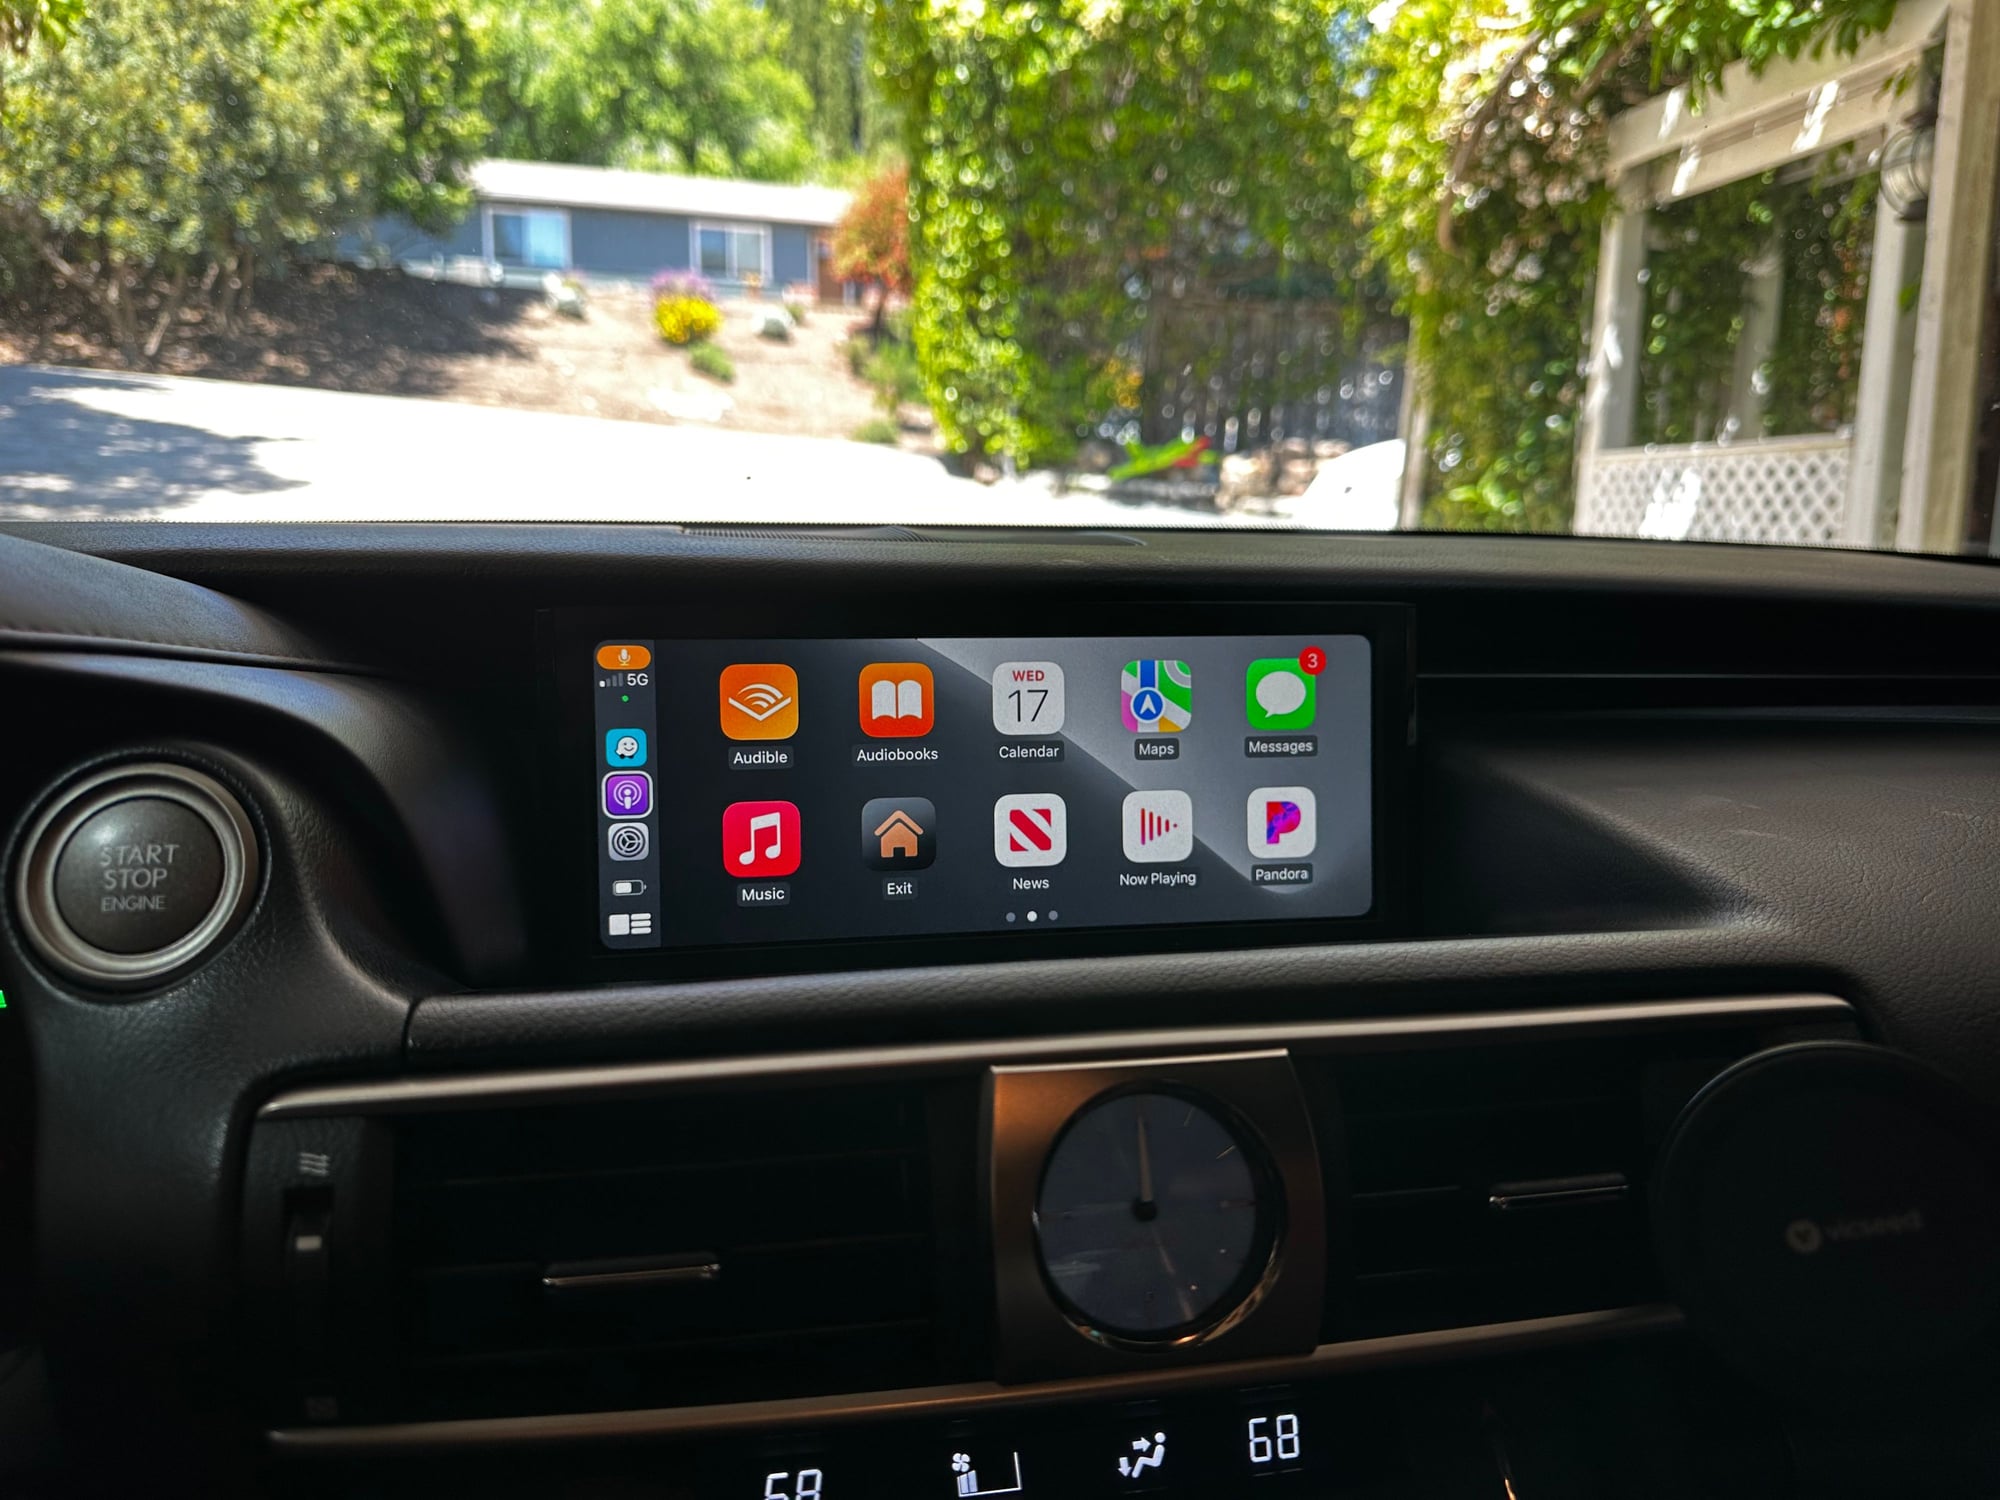 Audio Video/Electronics - 4x4shop.ca Apple Carplay and Android Auto unit - Used - 2015 to 2022 Lexus IS - Walnut Creek, CA 94597, United States